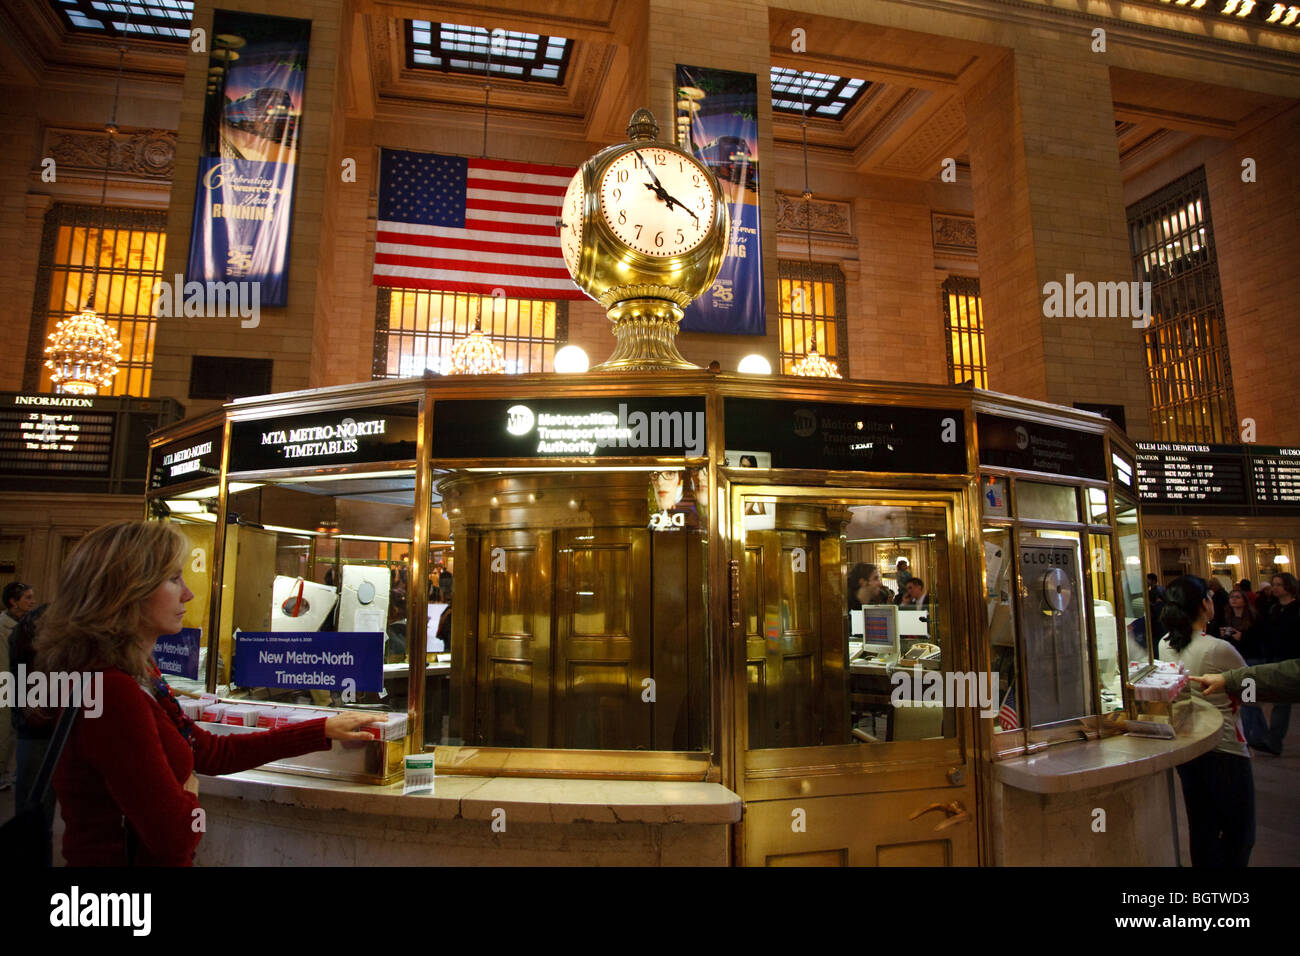 The information booth at the Grand Central Terminal in New York City, USA Stock Photo